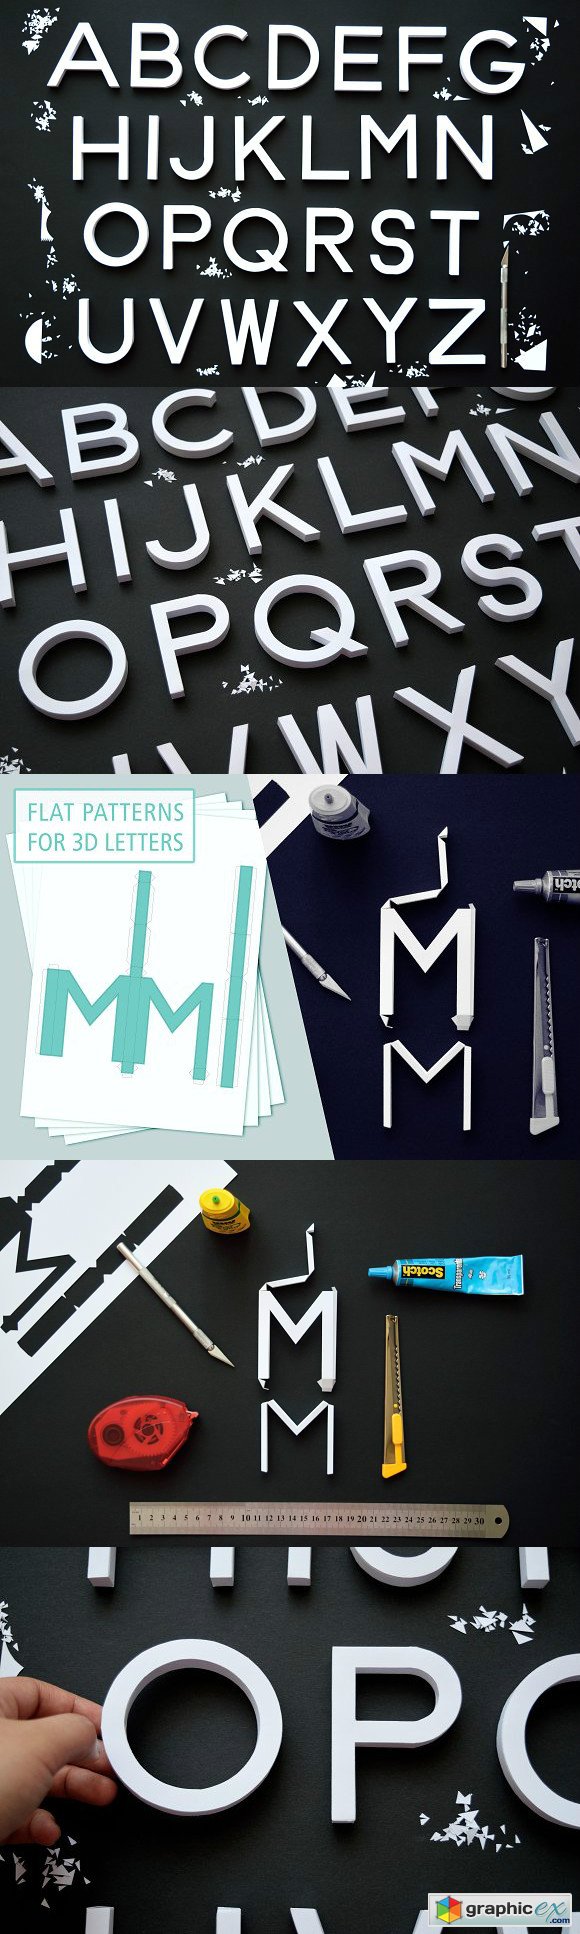 Flat patterns for 3D letters